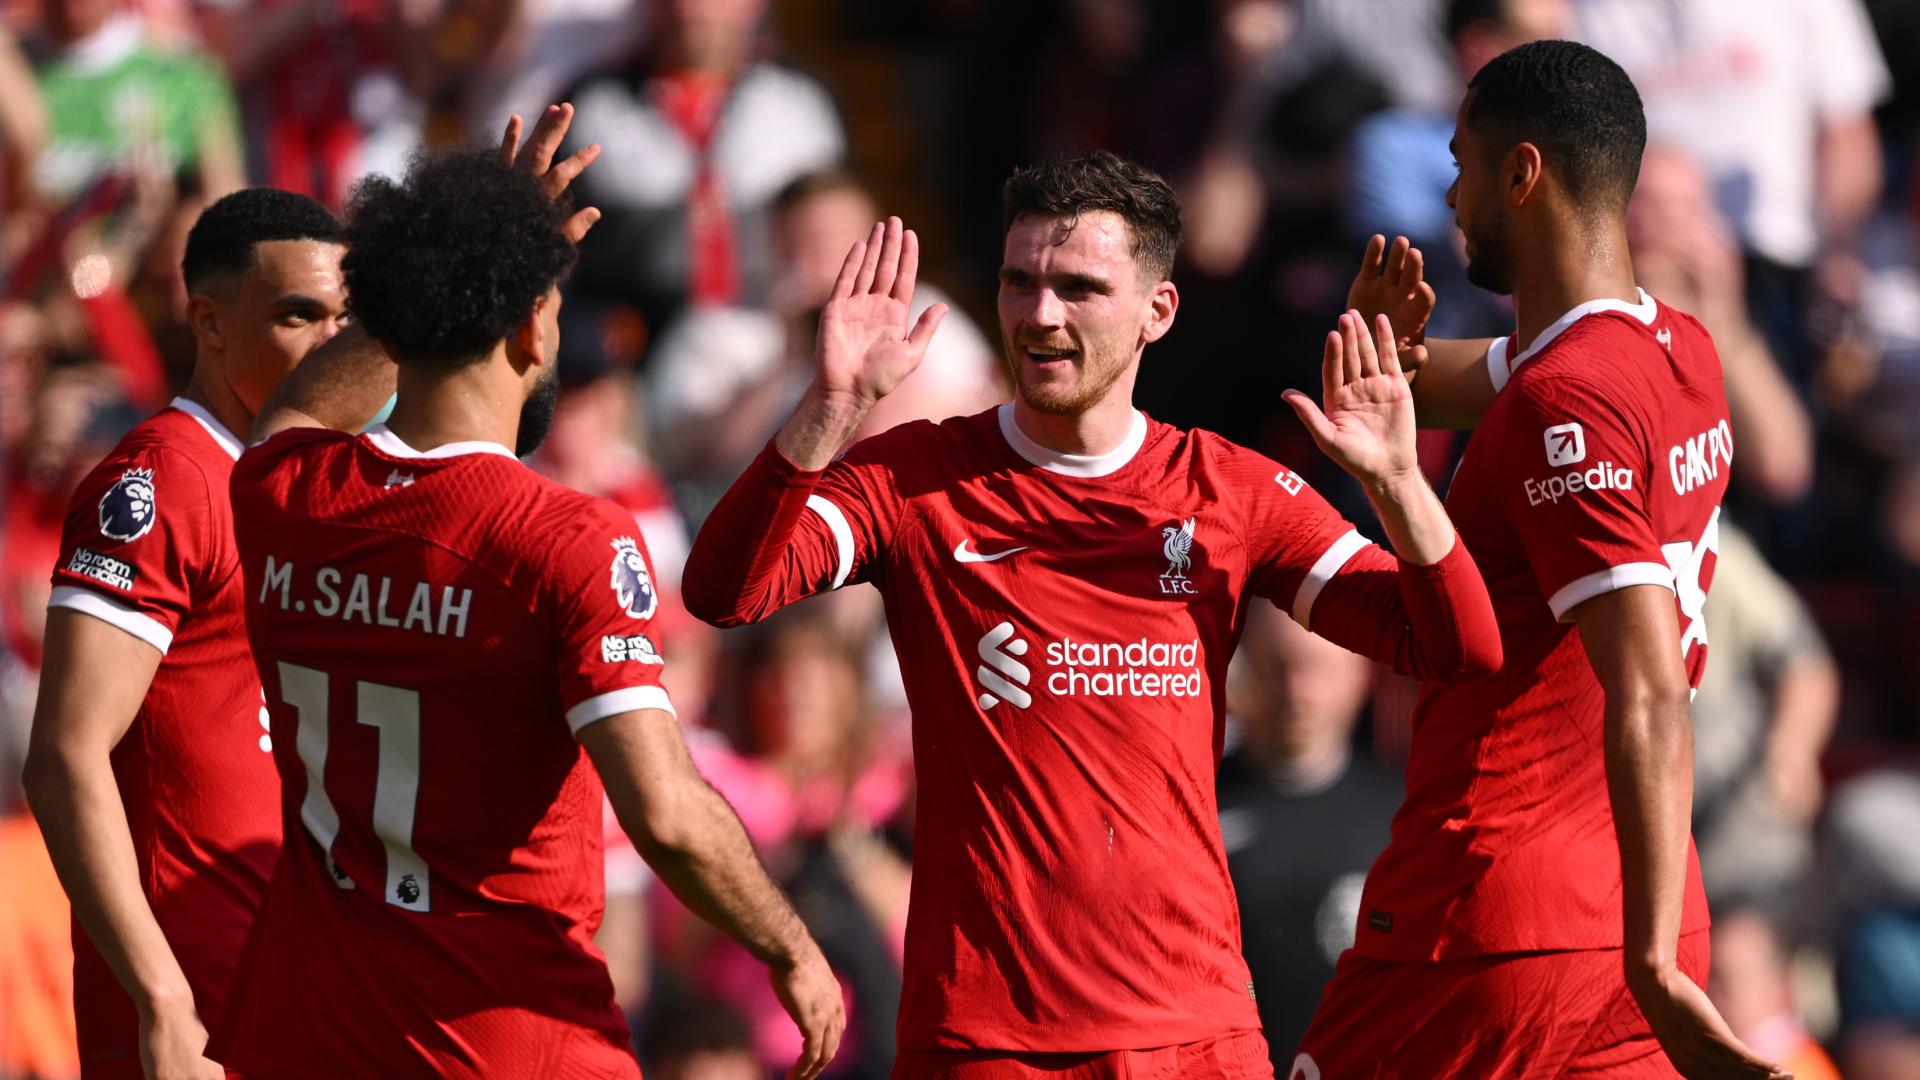 Thrilling Encounter: Liverpool Crushes Tottenham 4-2 at Anfield